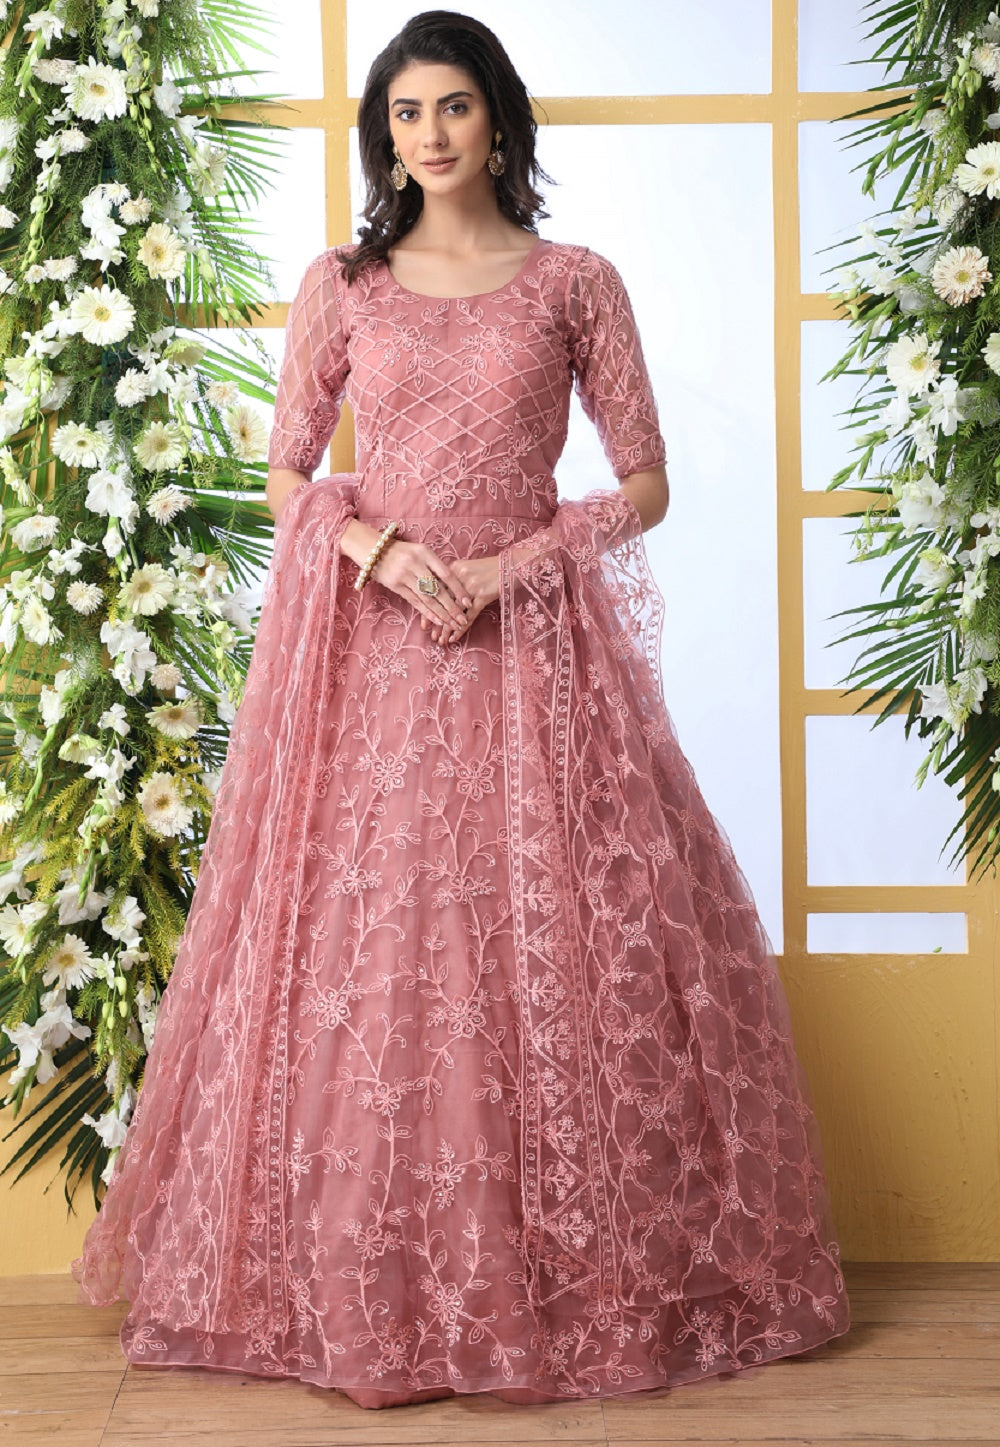 Embroidered Net Abaya Style Suit in Pink